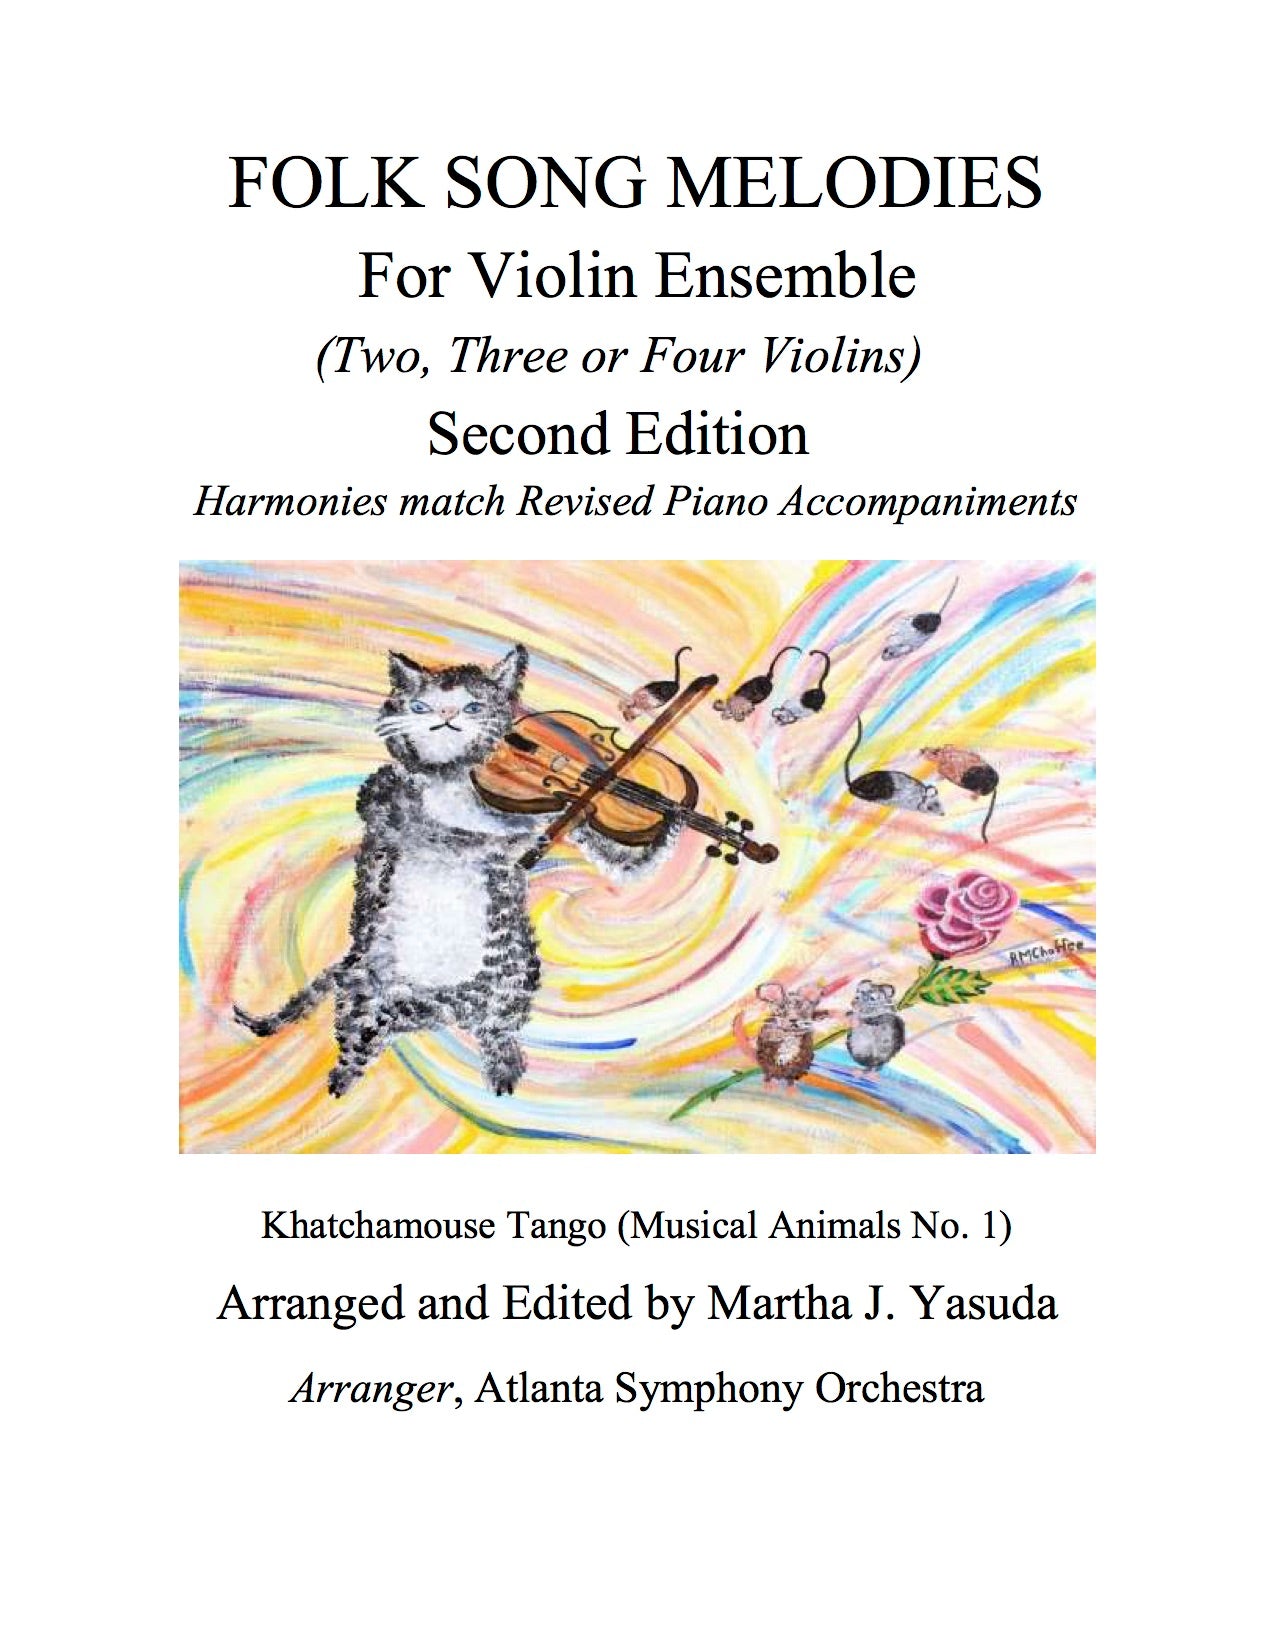 001 - Folk Song Melodies For Violin Ensemble (Twinkle - Etude)